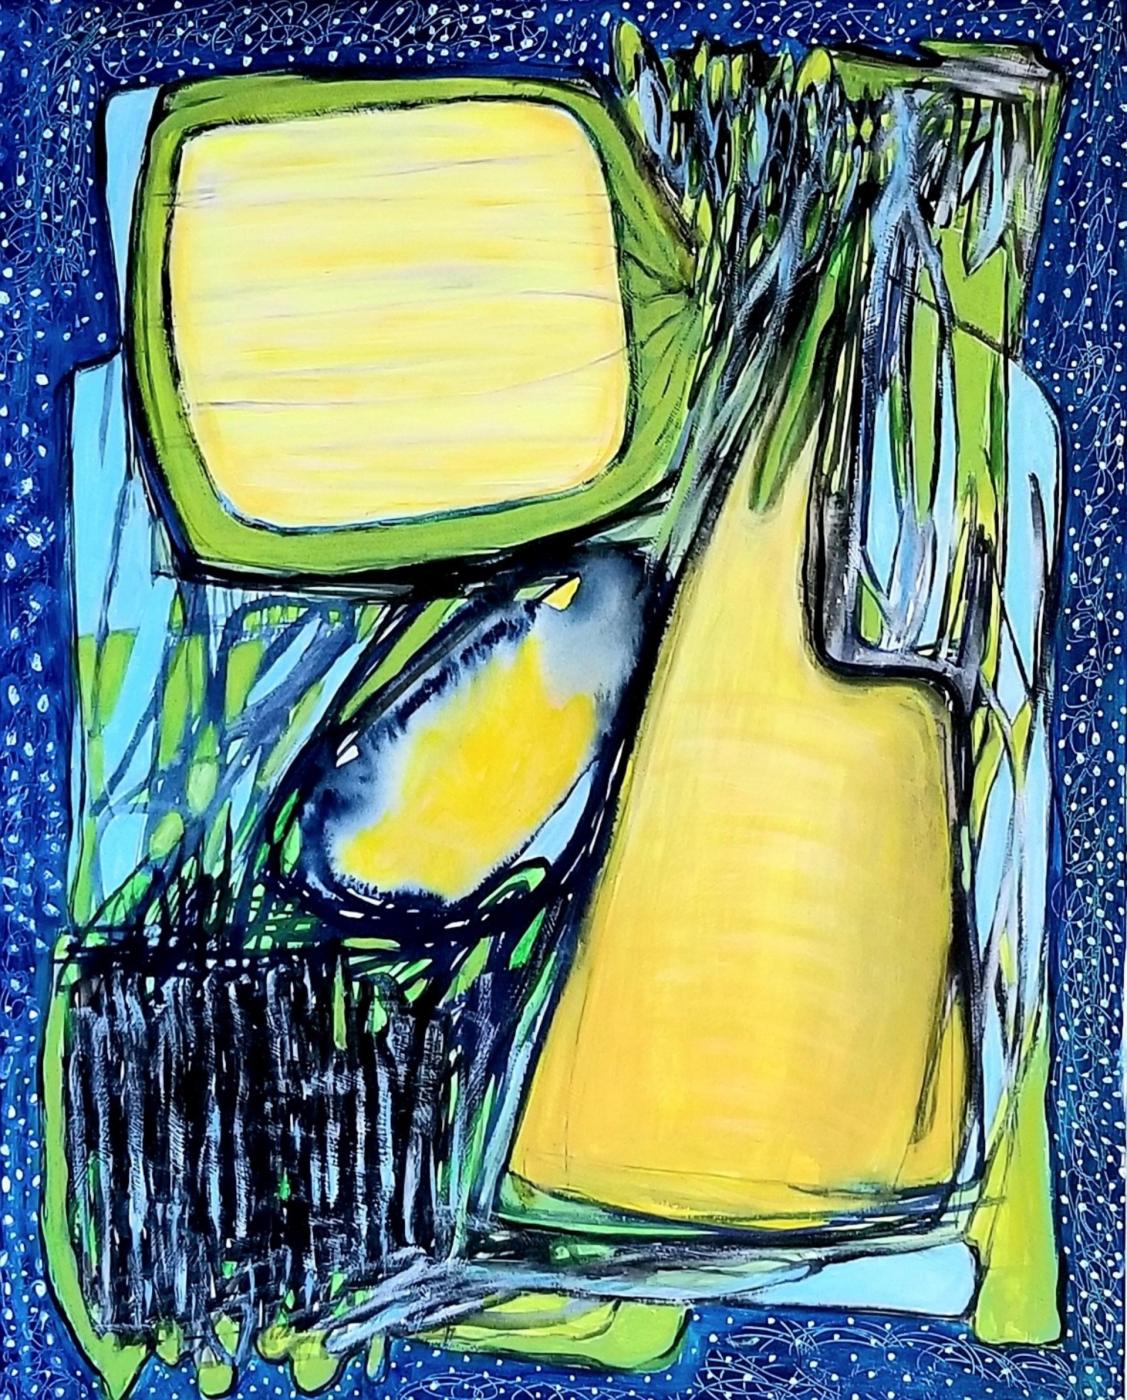 This painting is largely abstract. The upper left portion of this painting contains a yellow screened TV from the 1960’s. It is boxy, squarish in shape and framed in lime green. Below the TV shape on the left is a section of turquoise blue with an oblong yellow form of lined with navy blue which is seeping into the oblong shape. The lower left-hand side of the painting contains vigorous vertical strokes of paint in dark blue and black. The right-hand side of the painting contains a large acid yellow shape l